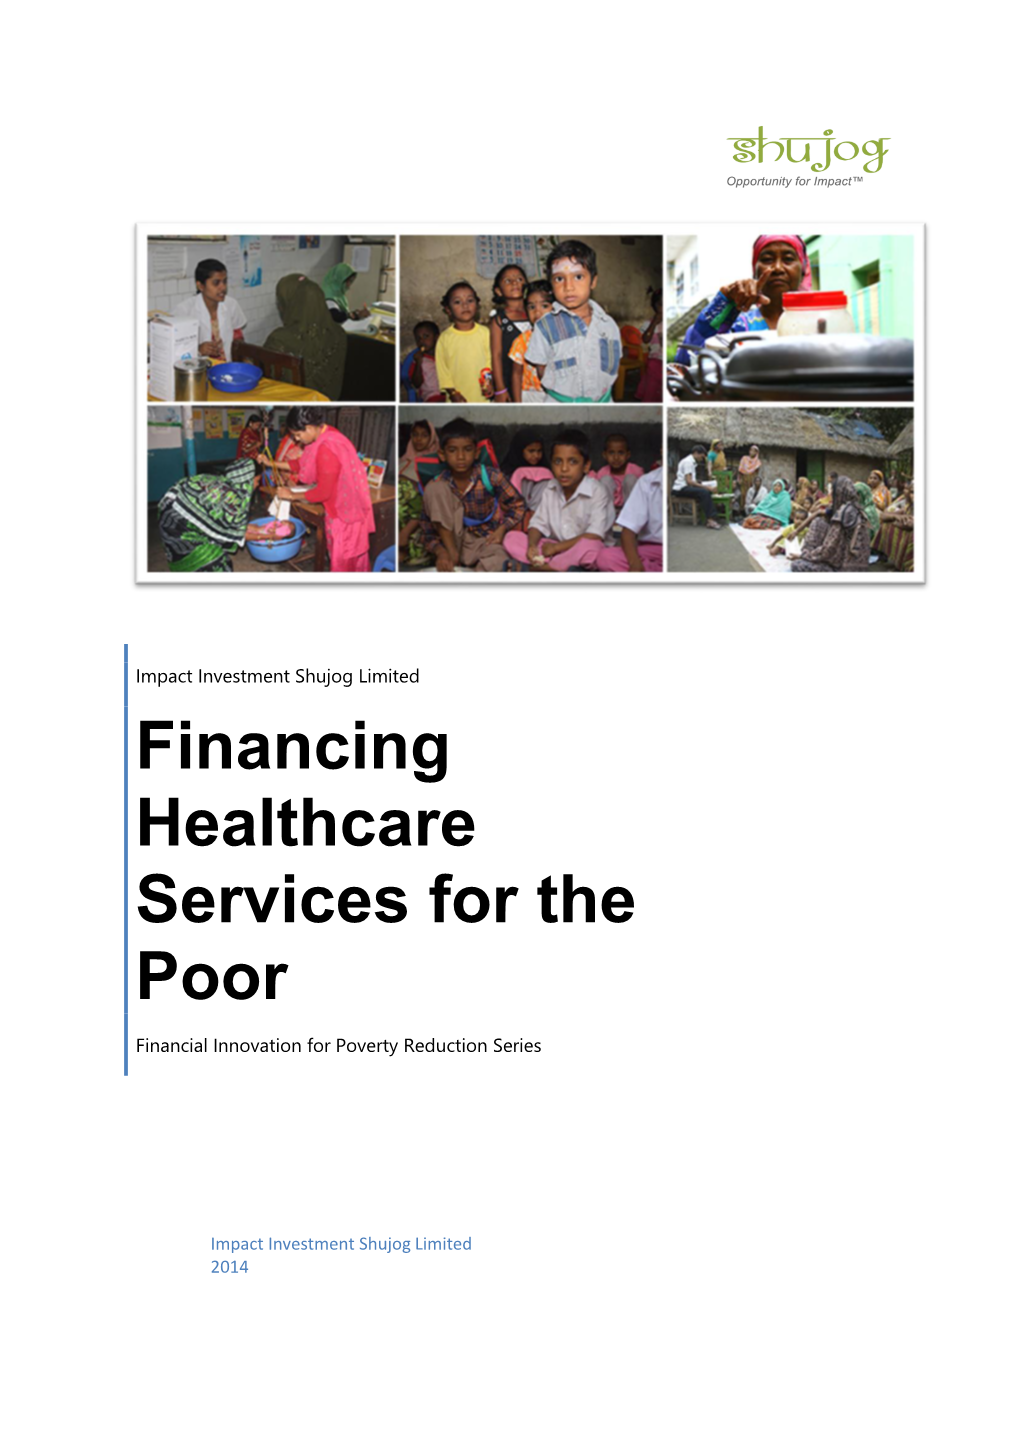 Financing Healthcare Services for the Poor